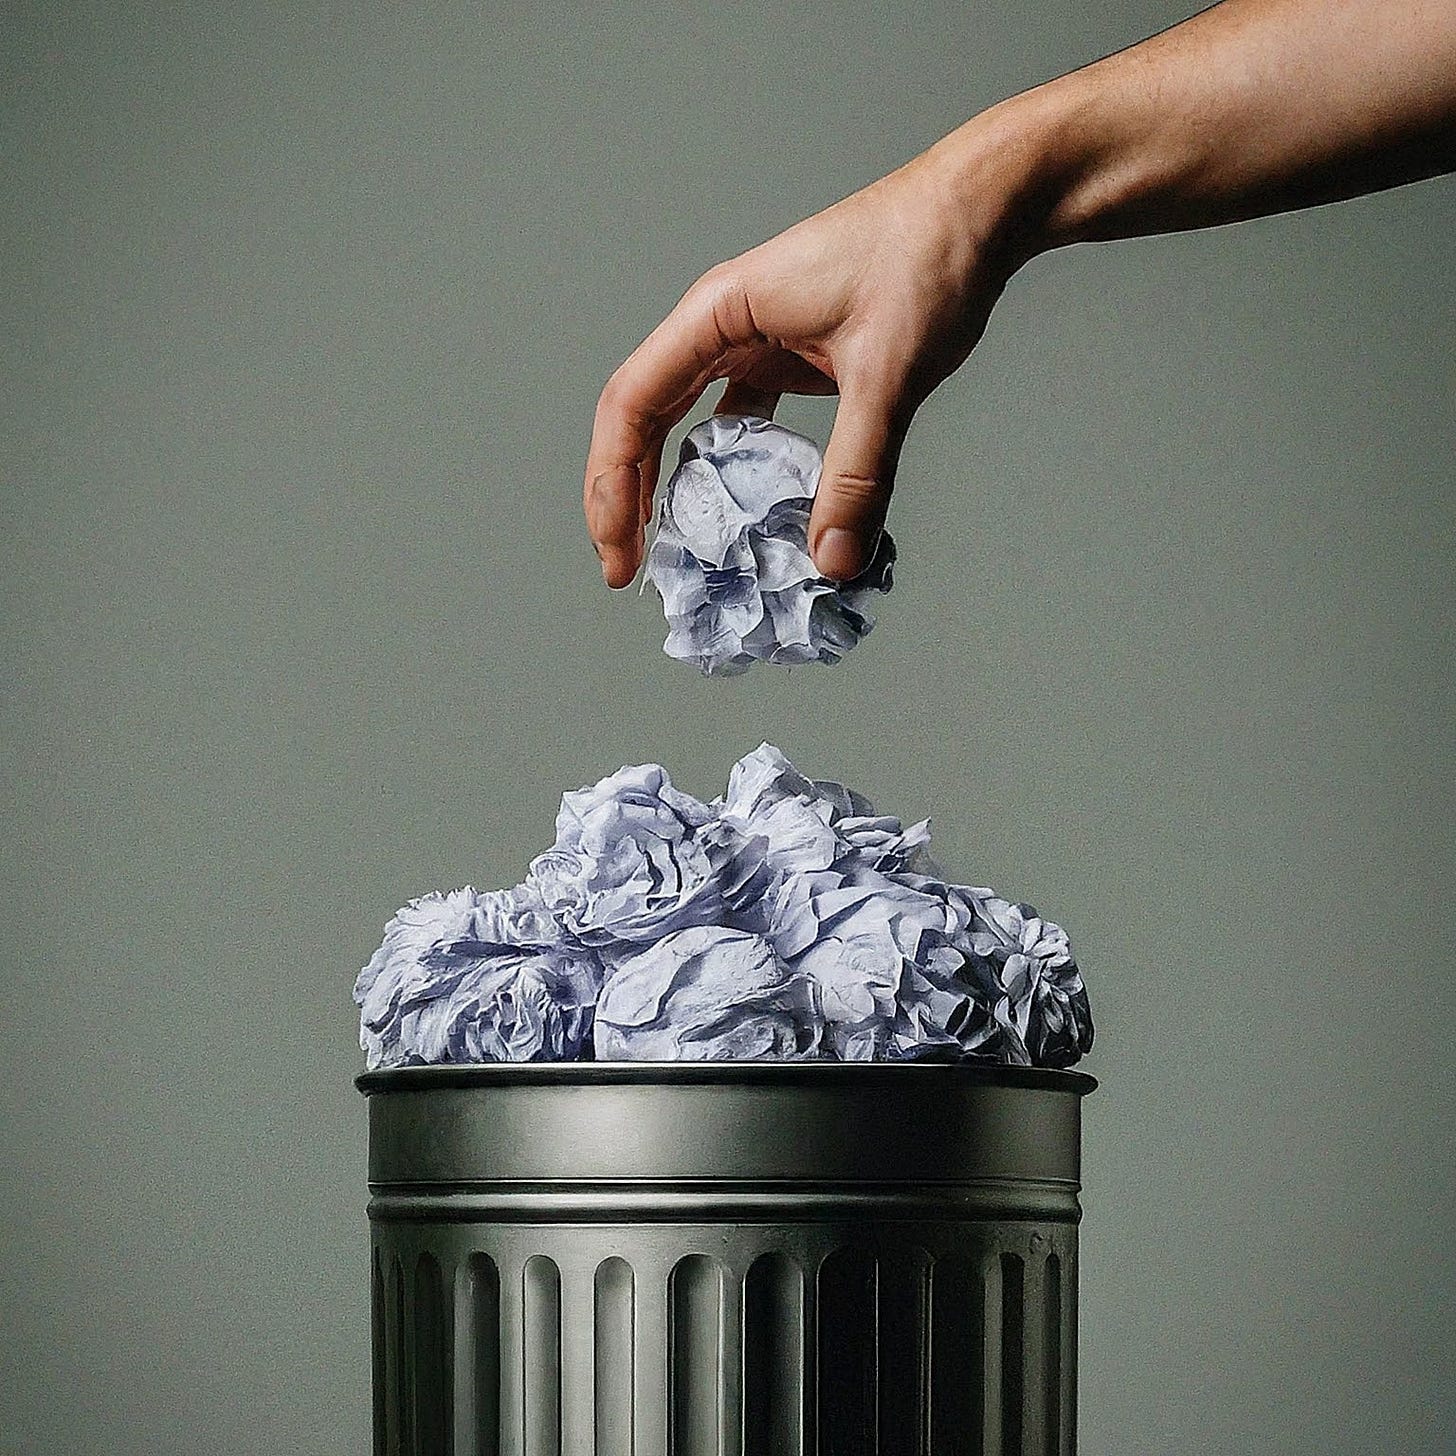 A hand drops a crumpled piece of paper into an overflowing garbage can of other crumpled balls.